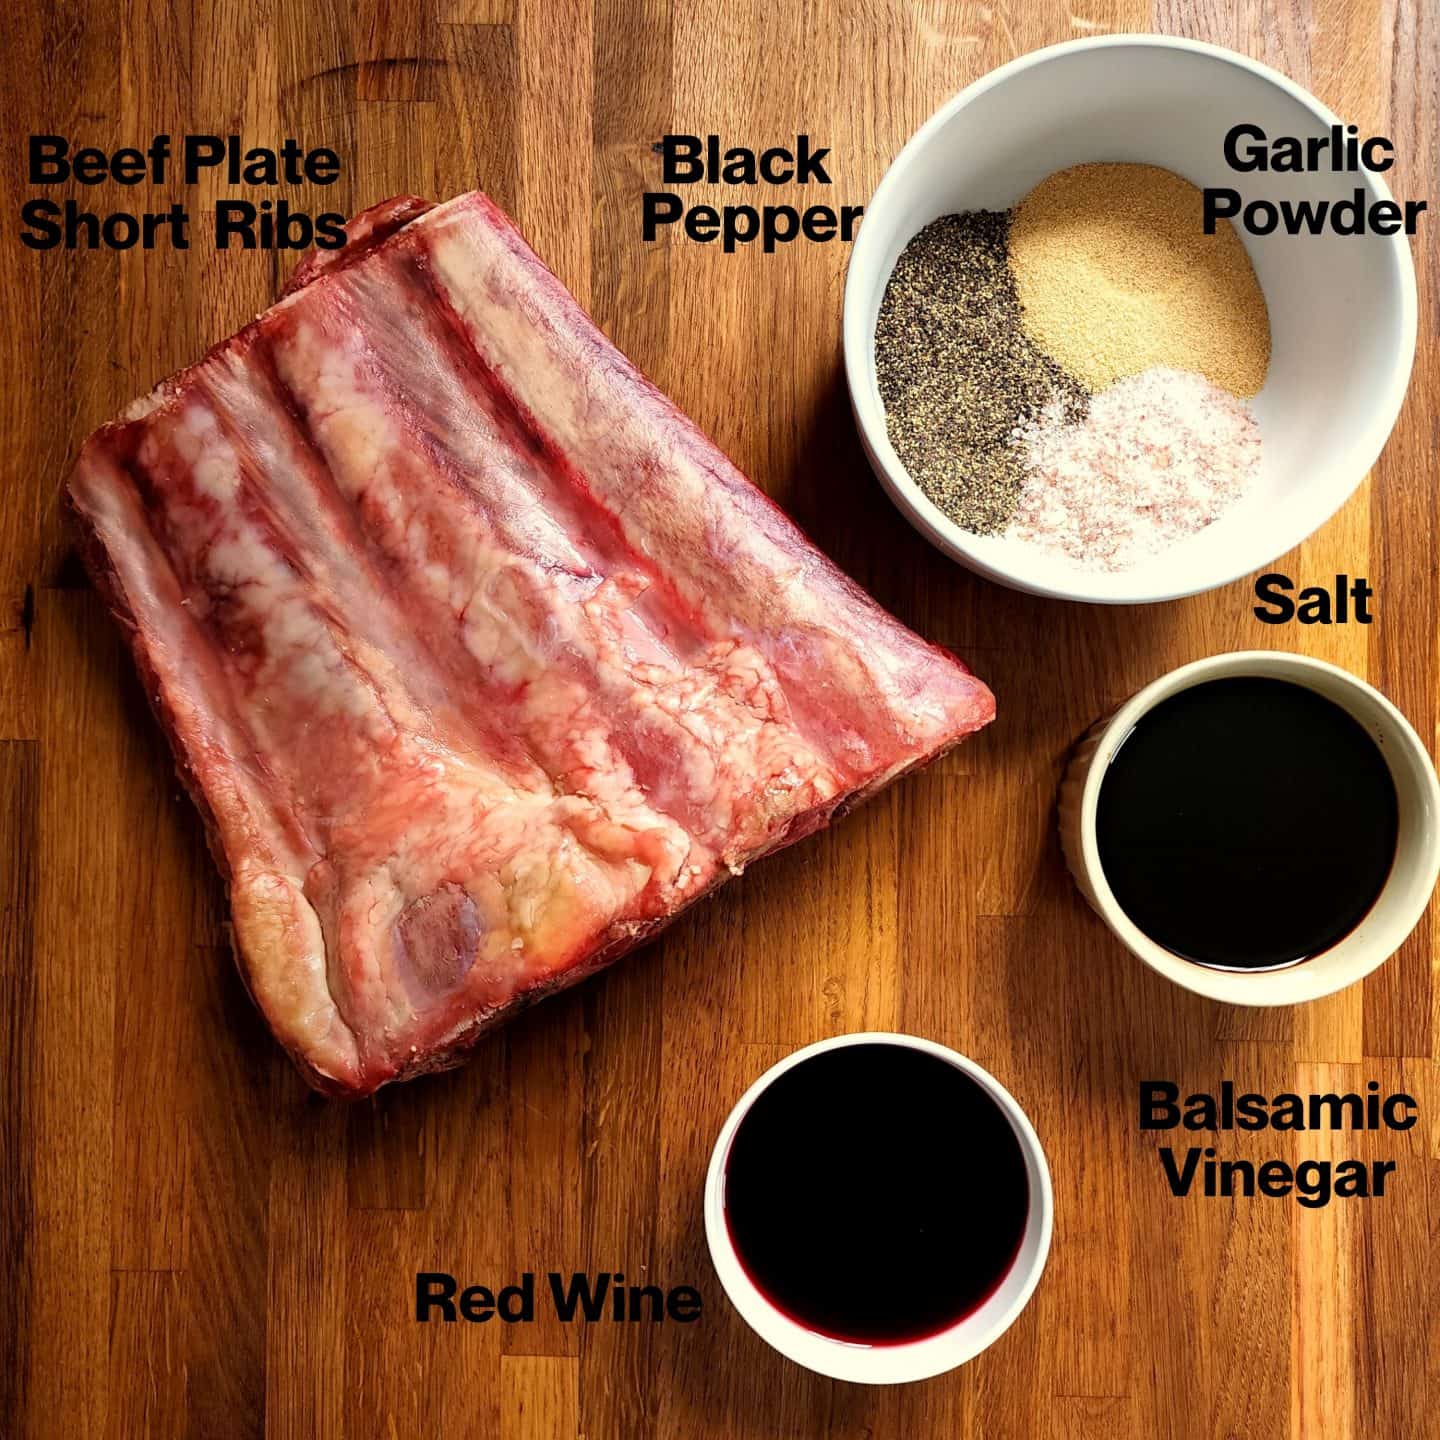 Smoked Beef Plate Ribs Ingredients